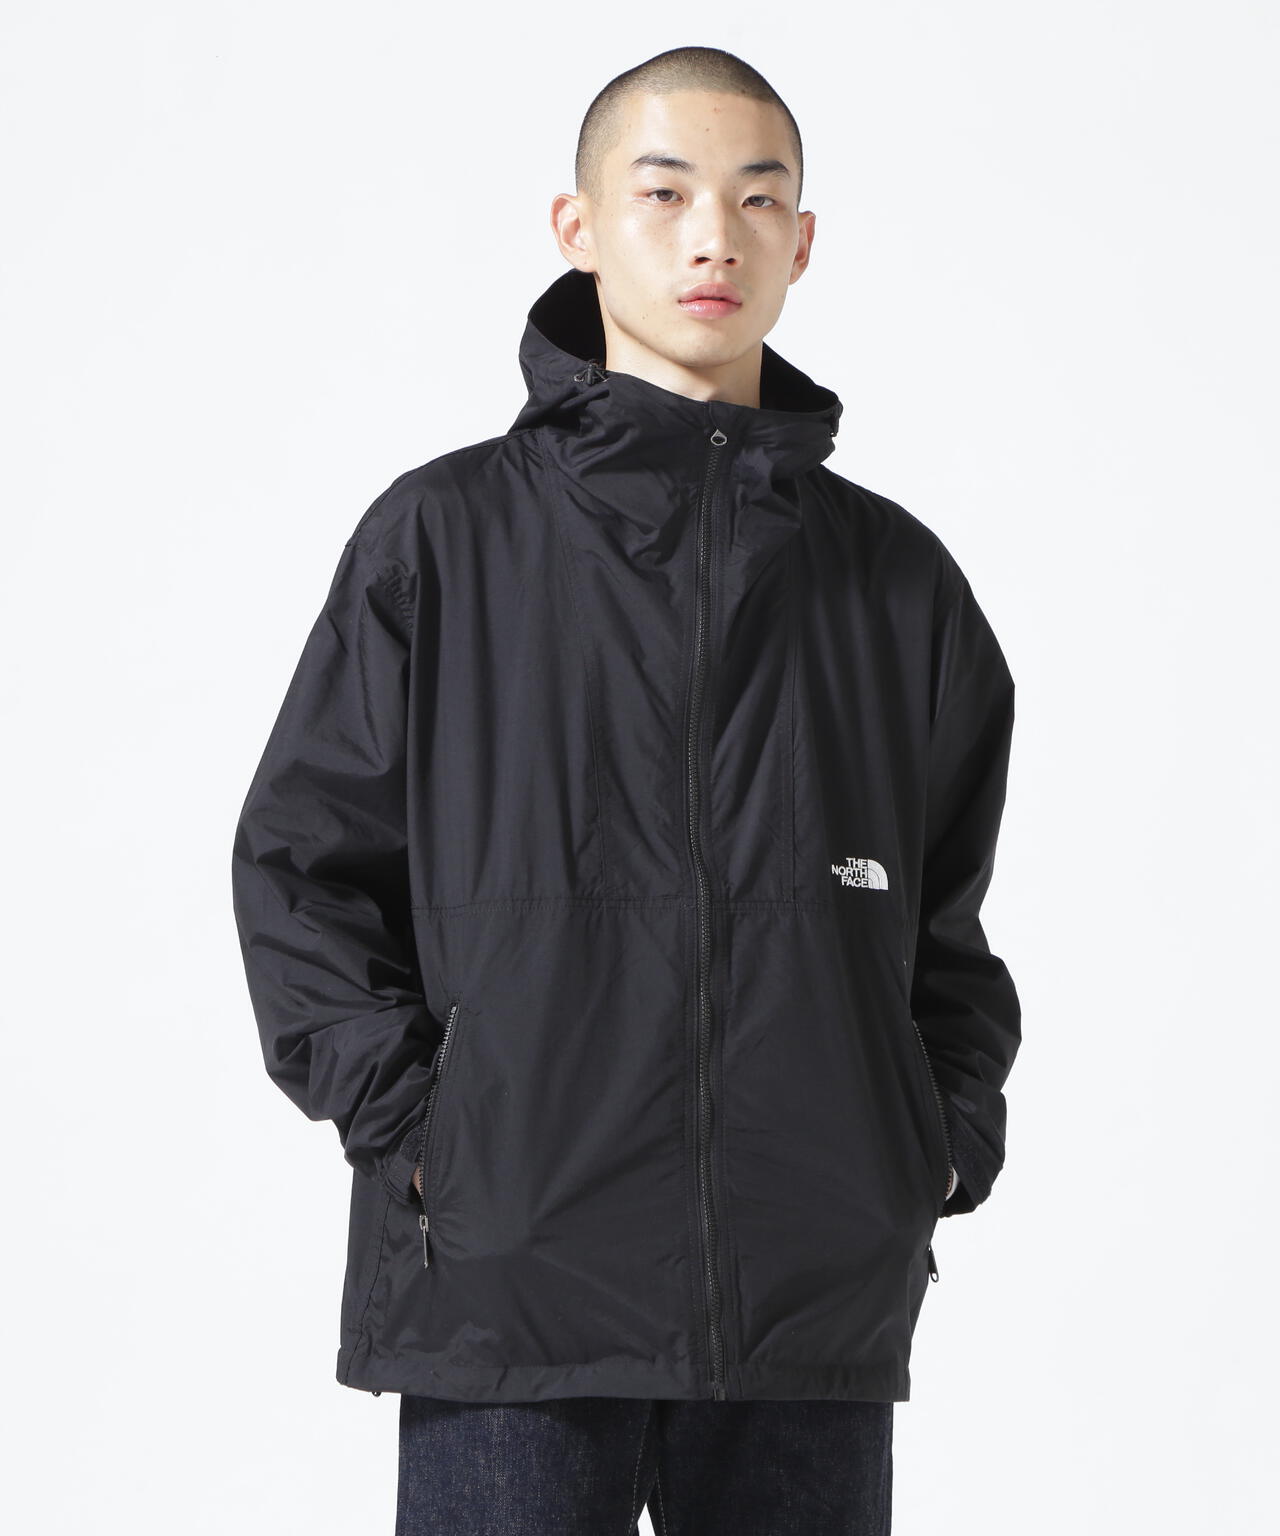 THE NORTH FACE/ザ・ノースフェイス/Compact Jacket/コンパクト ...